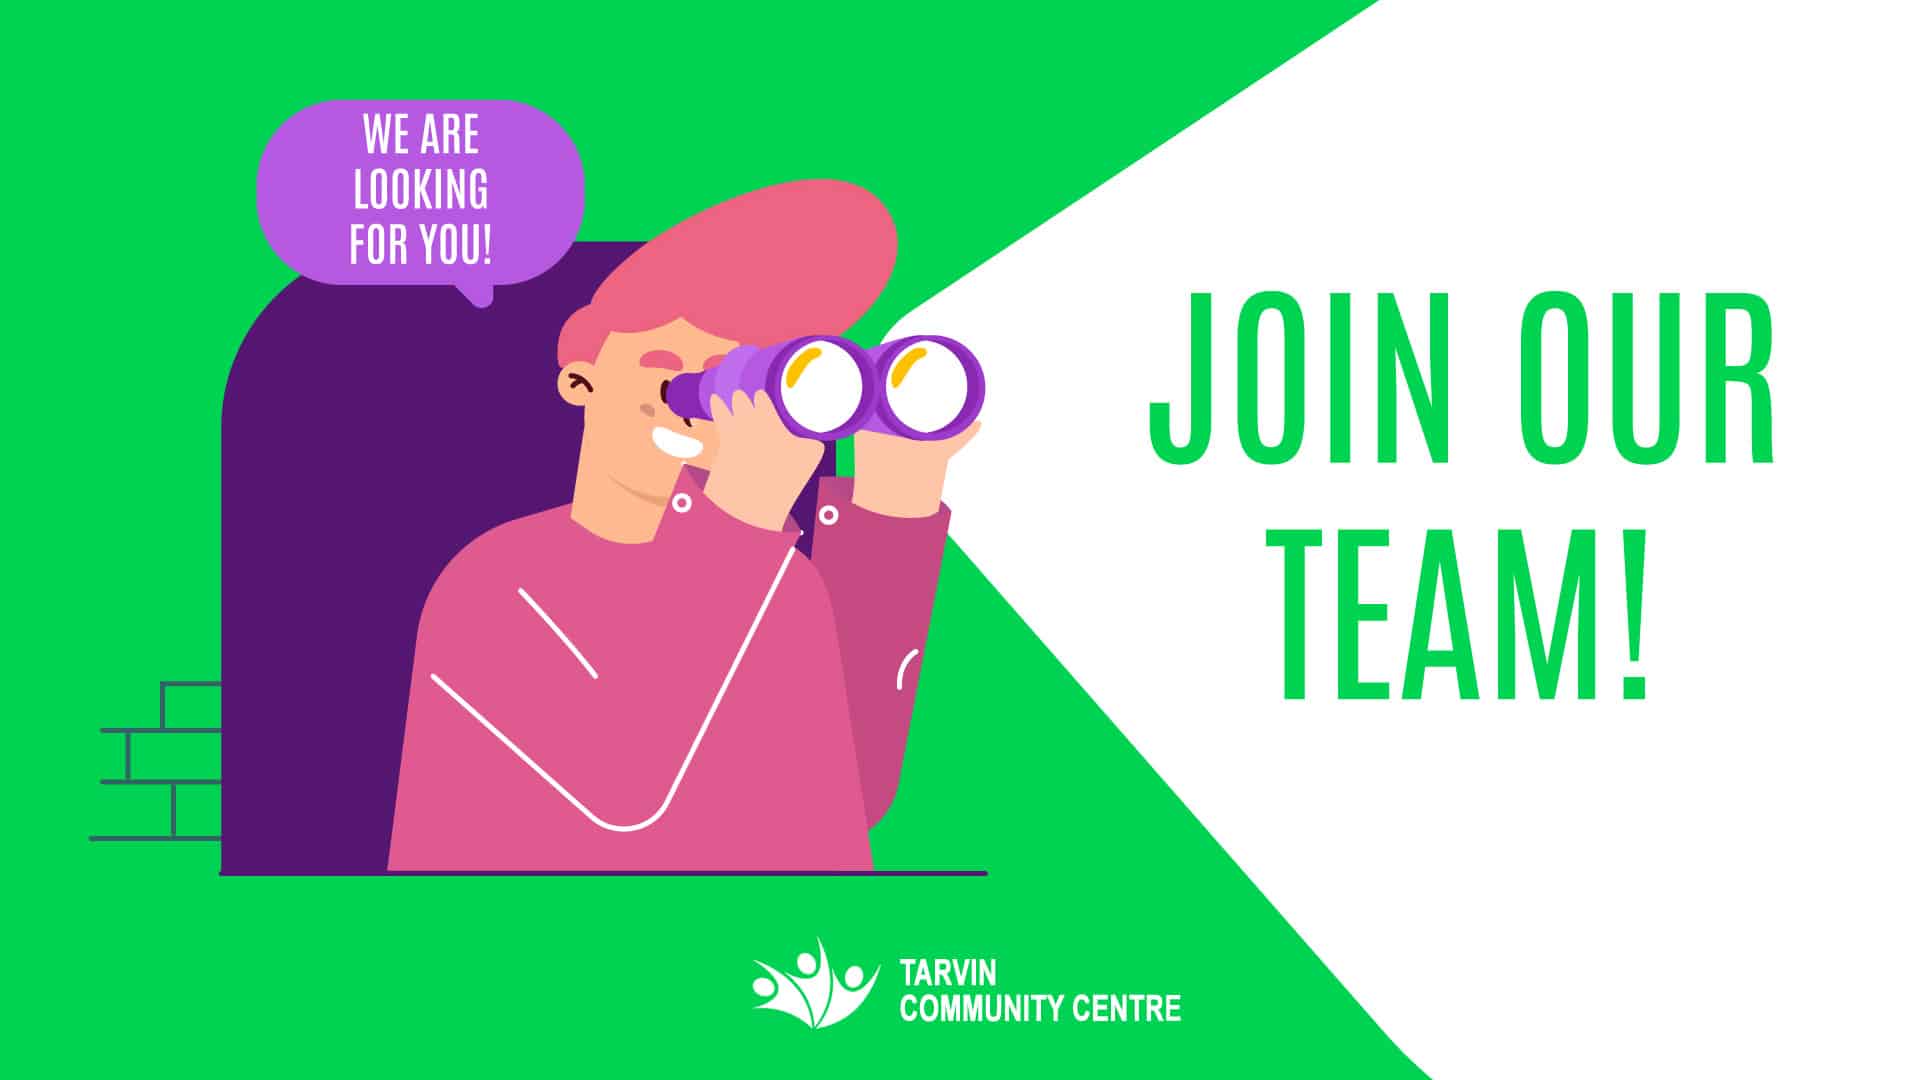 Tarvin Community Centre is looking for Arts Officer